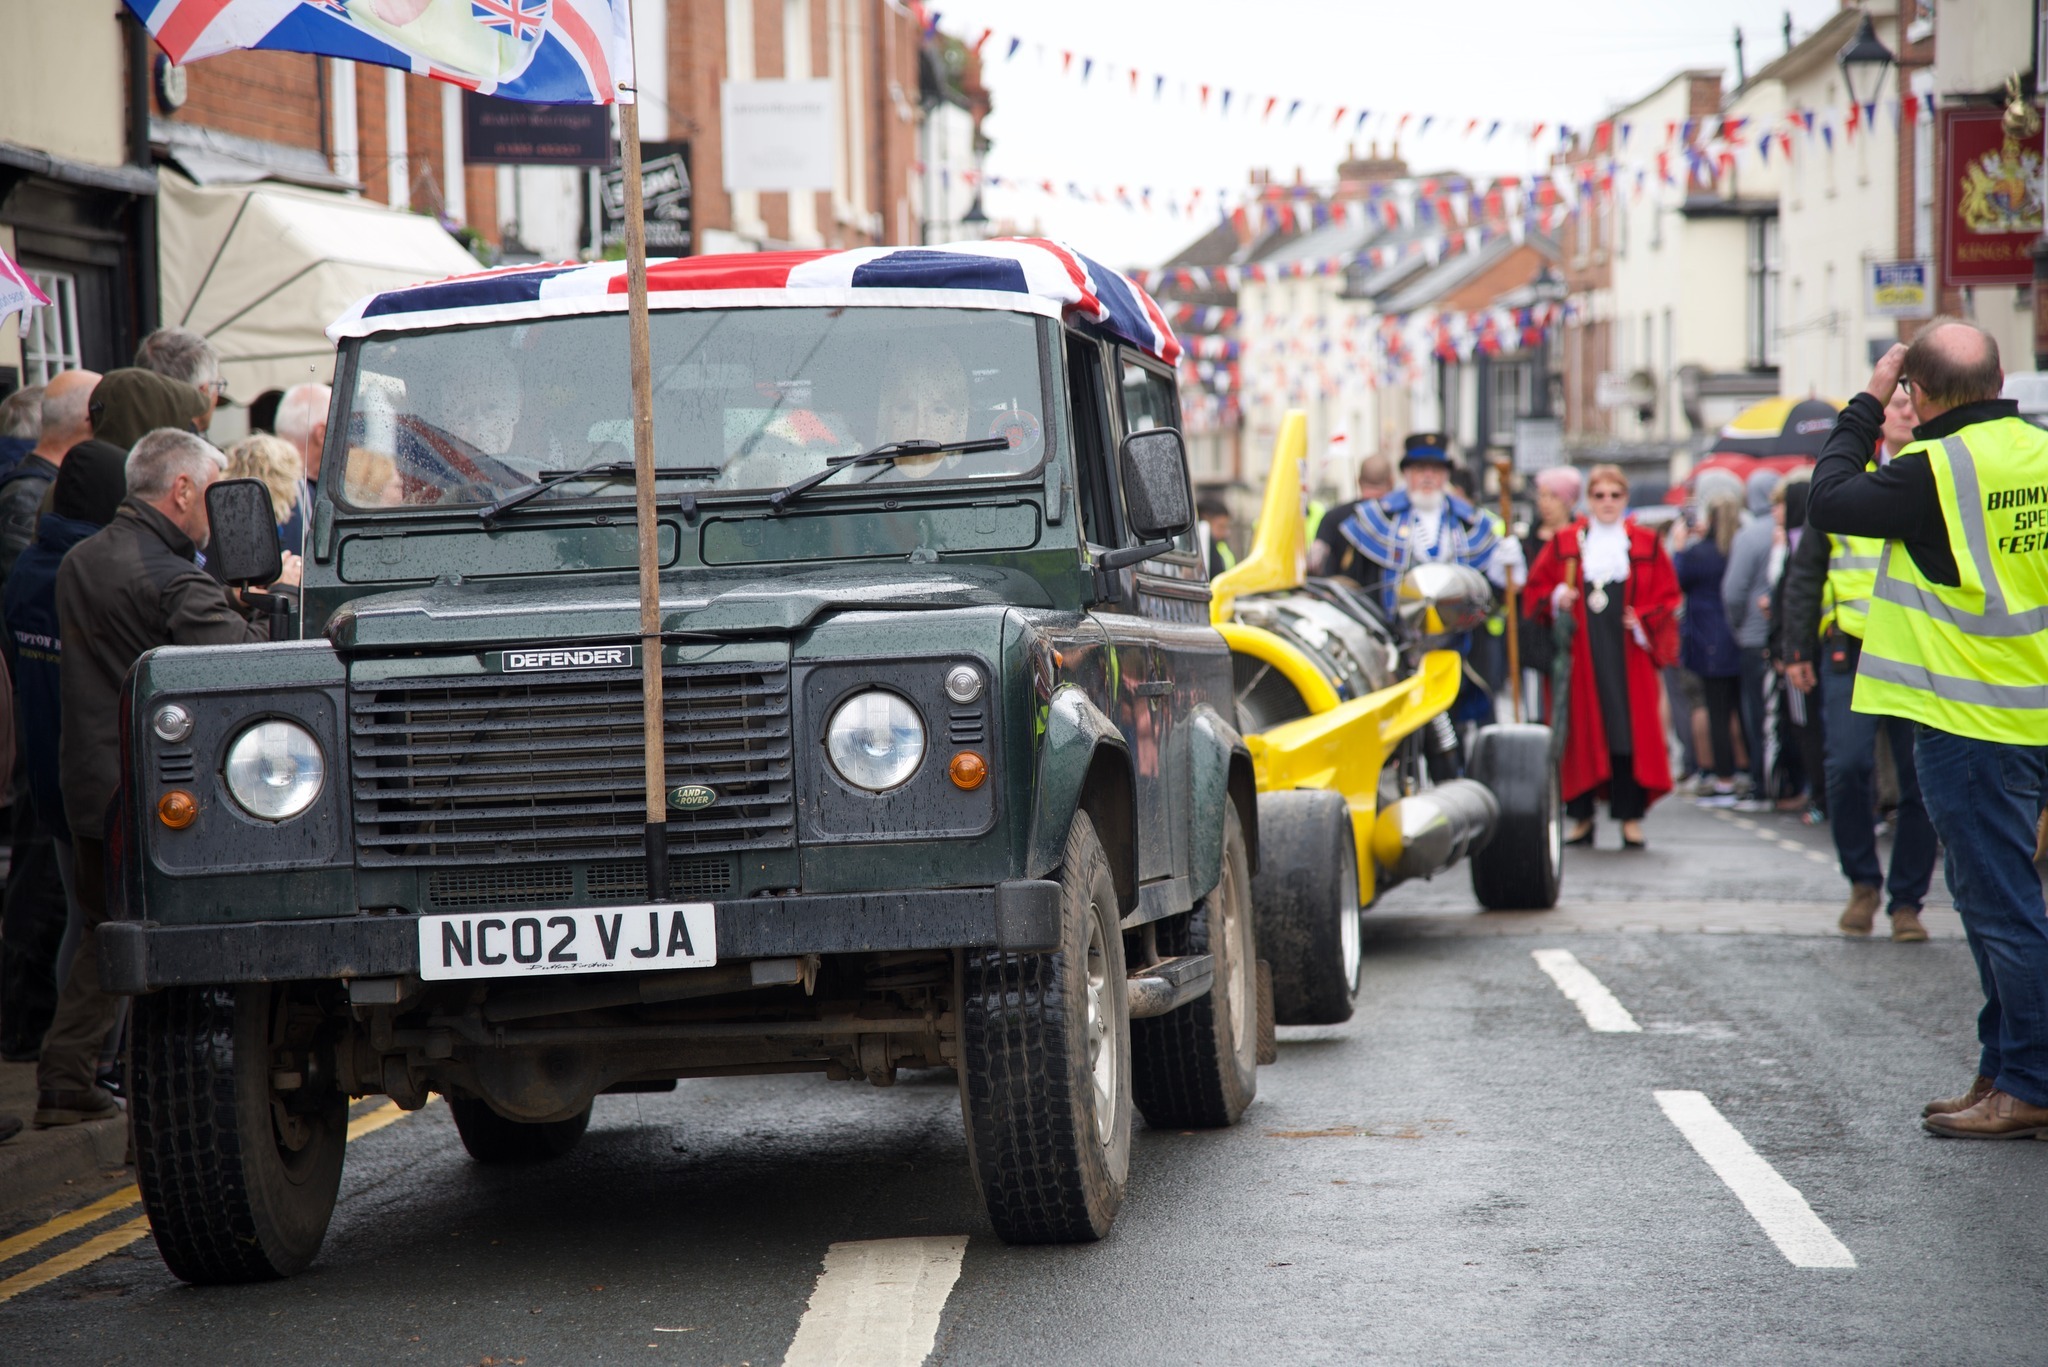 Bromyard Speed Festival 2022: A 2002 Land Rover Defender towing the jet-powered Vampire dragster. Picture: Jane Hufton